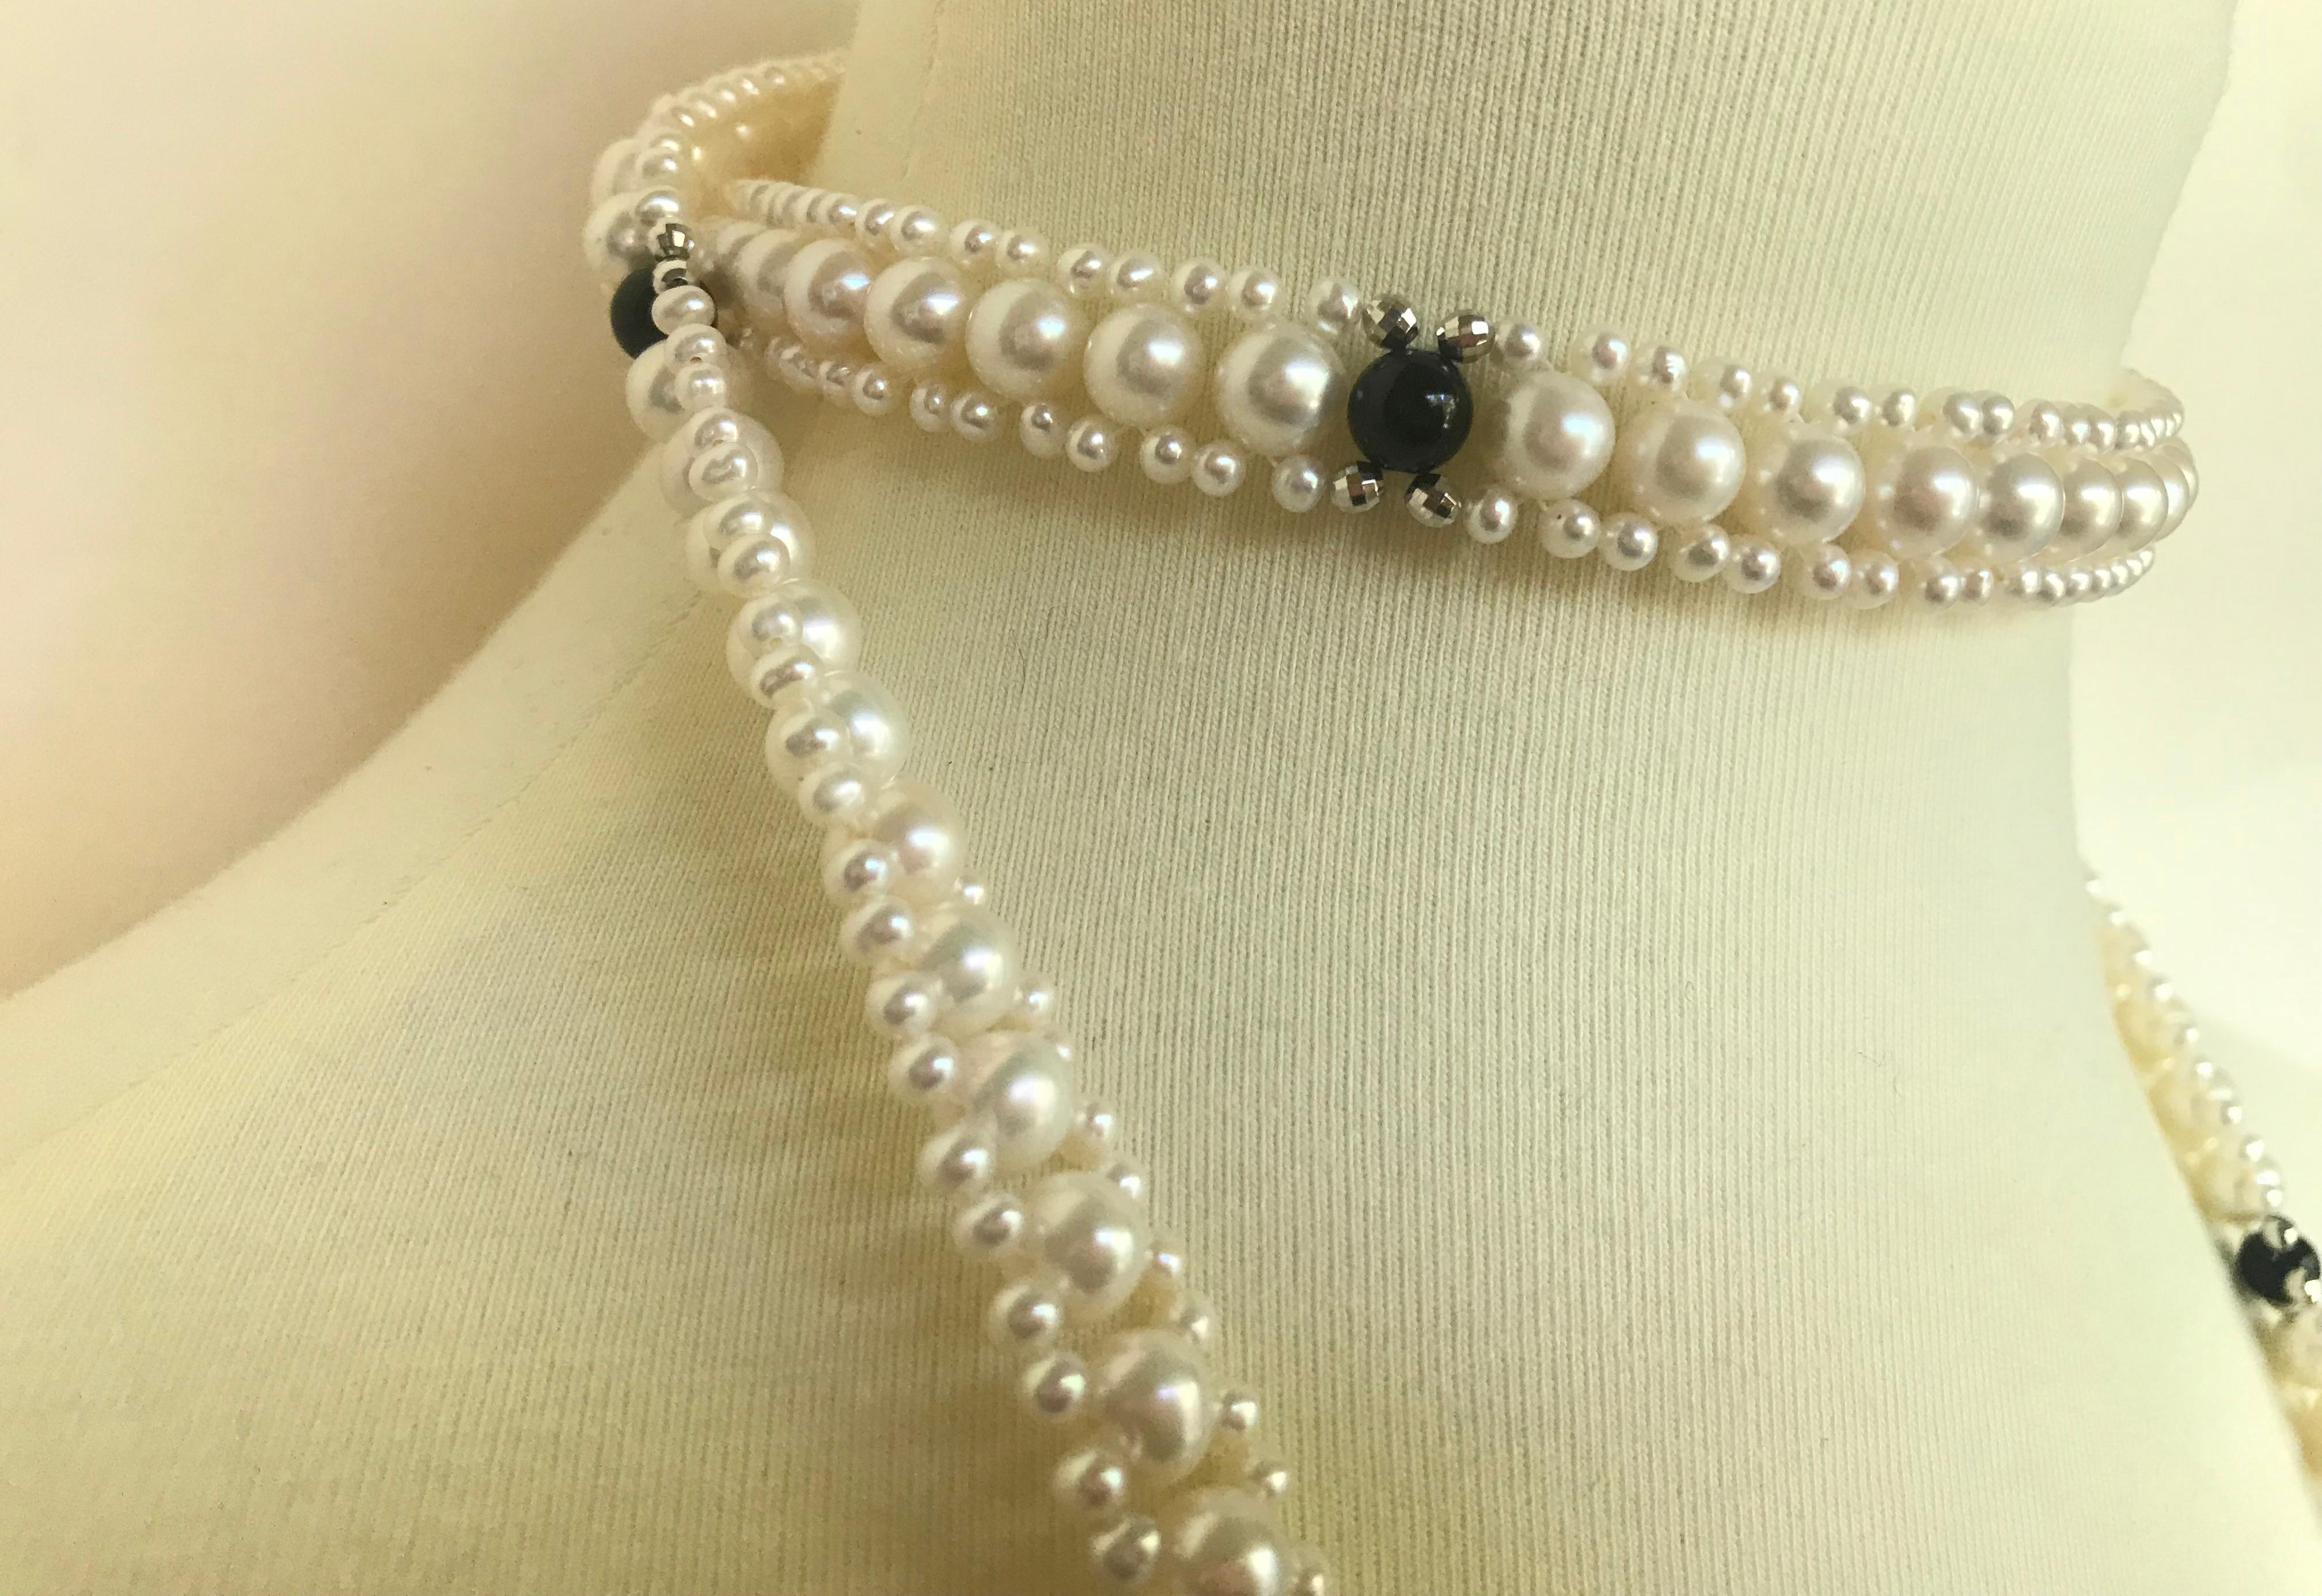 Marina J Woven Pearl Sautoir with Tassels and 14 K White Gold and Onyx beads 3